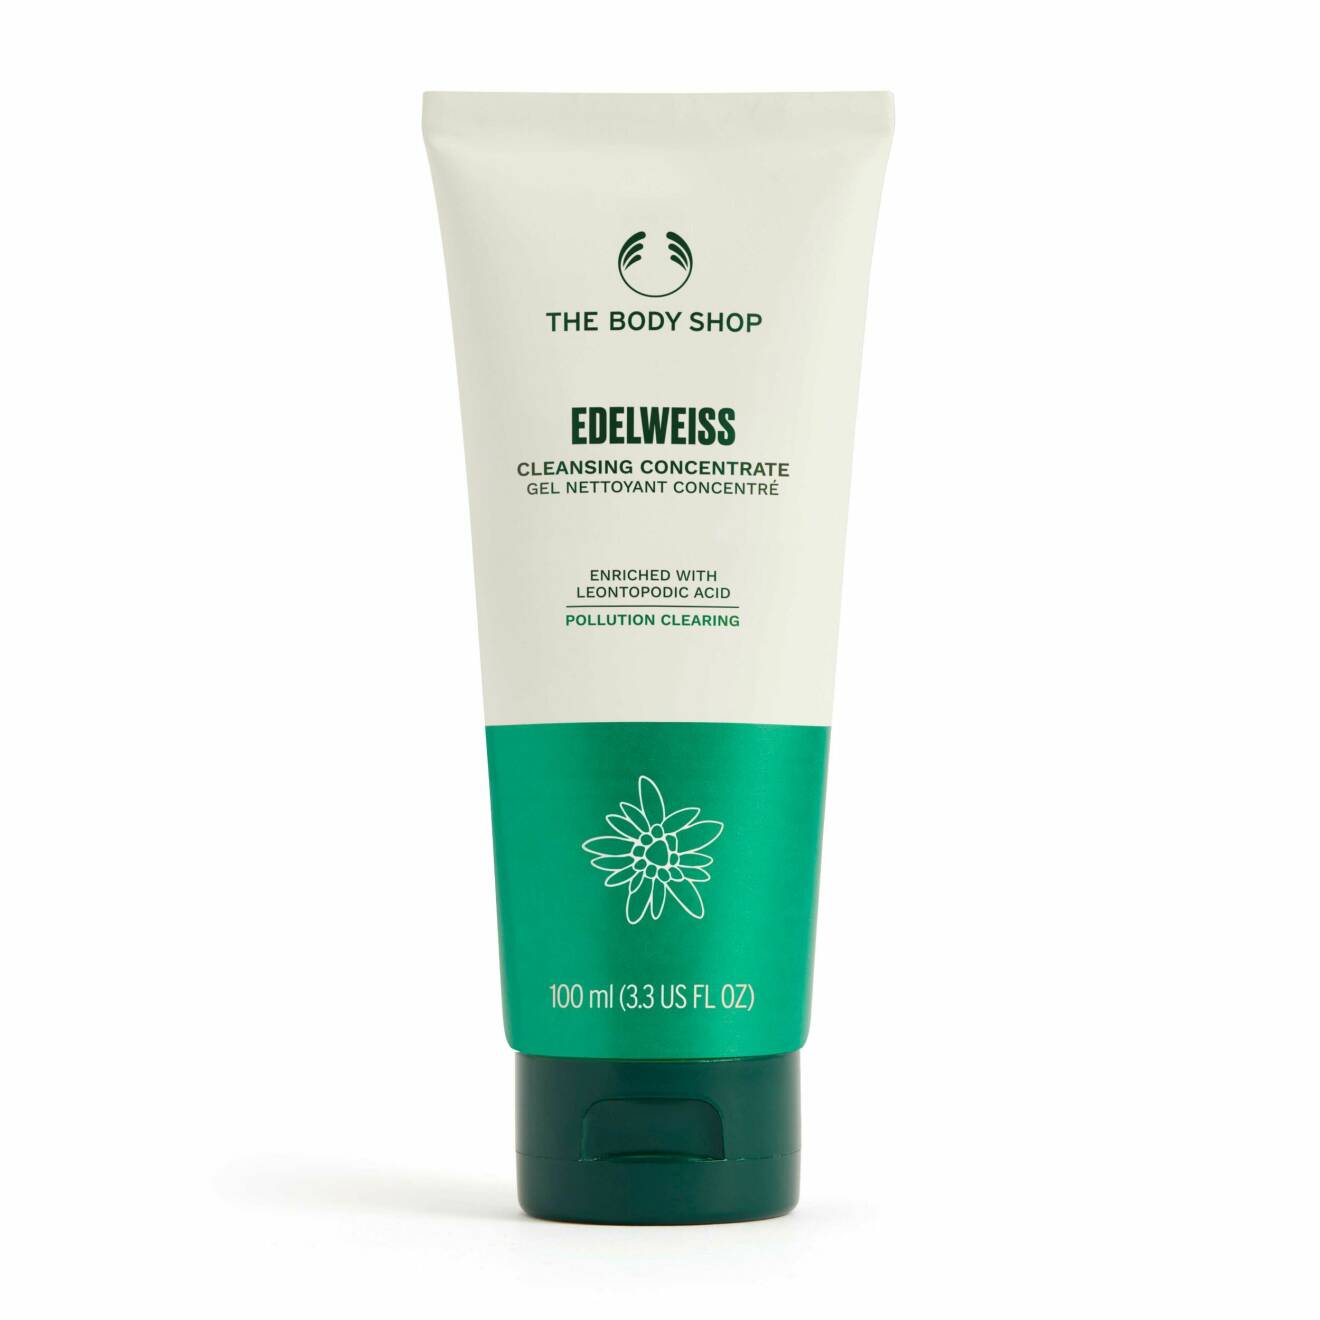 Edelweiss Cleansing Concentrate från The Body Shop.